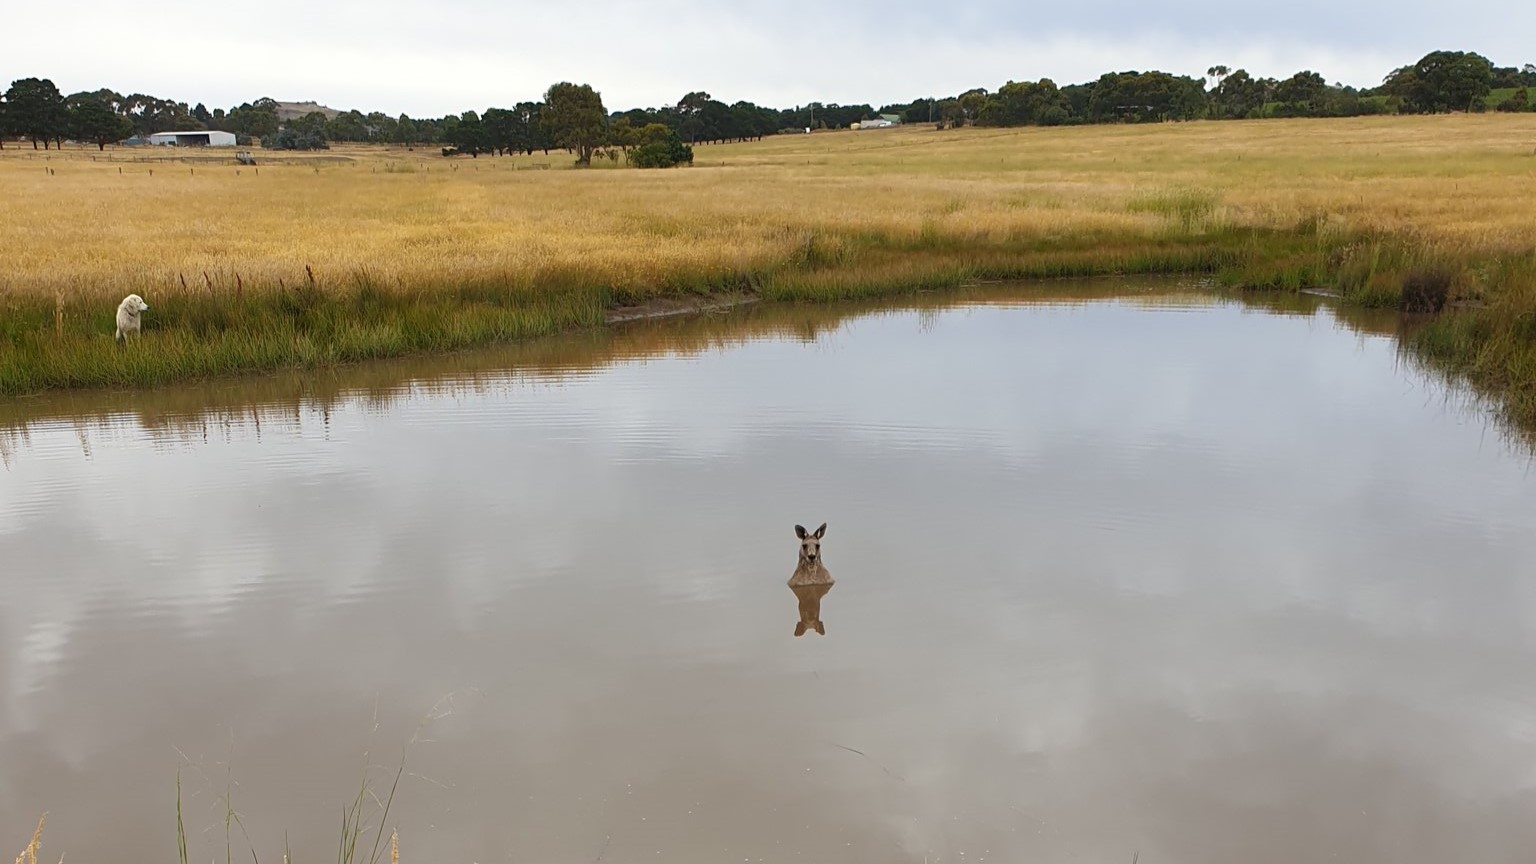 A kangaroo stands in a small water reservoir and a dog waits on the banks.